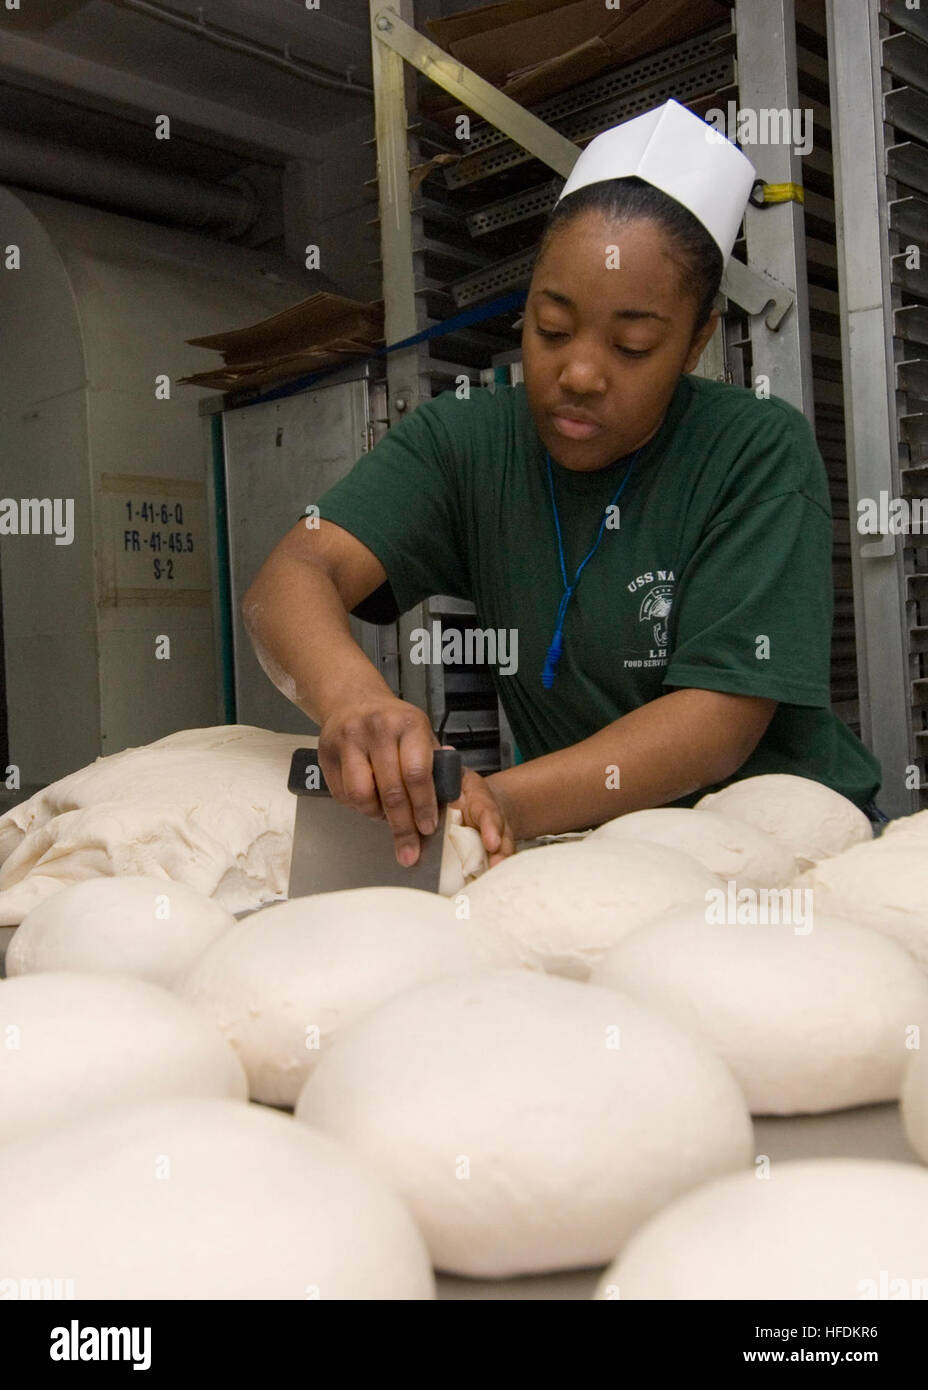 091108-N-6439C-017 ATLANTIC OCEAN (Nov. 8, 2009) Airman Lakendra Williams cuts bread dough in the bake shop aboard the amphibious assault ship USS Nassau (LHA 4) during a Composite Unit Training Exercise. The U.S. 2nd Fleet training exercise is conducted from Oct. 23 to Nov. 17 off the East Coast from Virginia to Florida. (U.S. Navy photo by Mass Communication Specialist 2nd class Amanda Clayton/Released) An Airman cuts bread dough aboard USS Nassau (LHA 4) Stock Photo